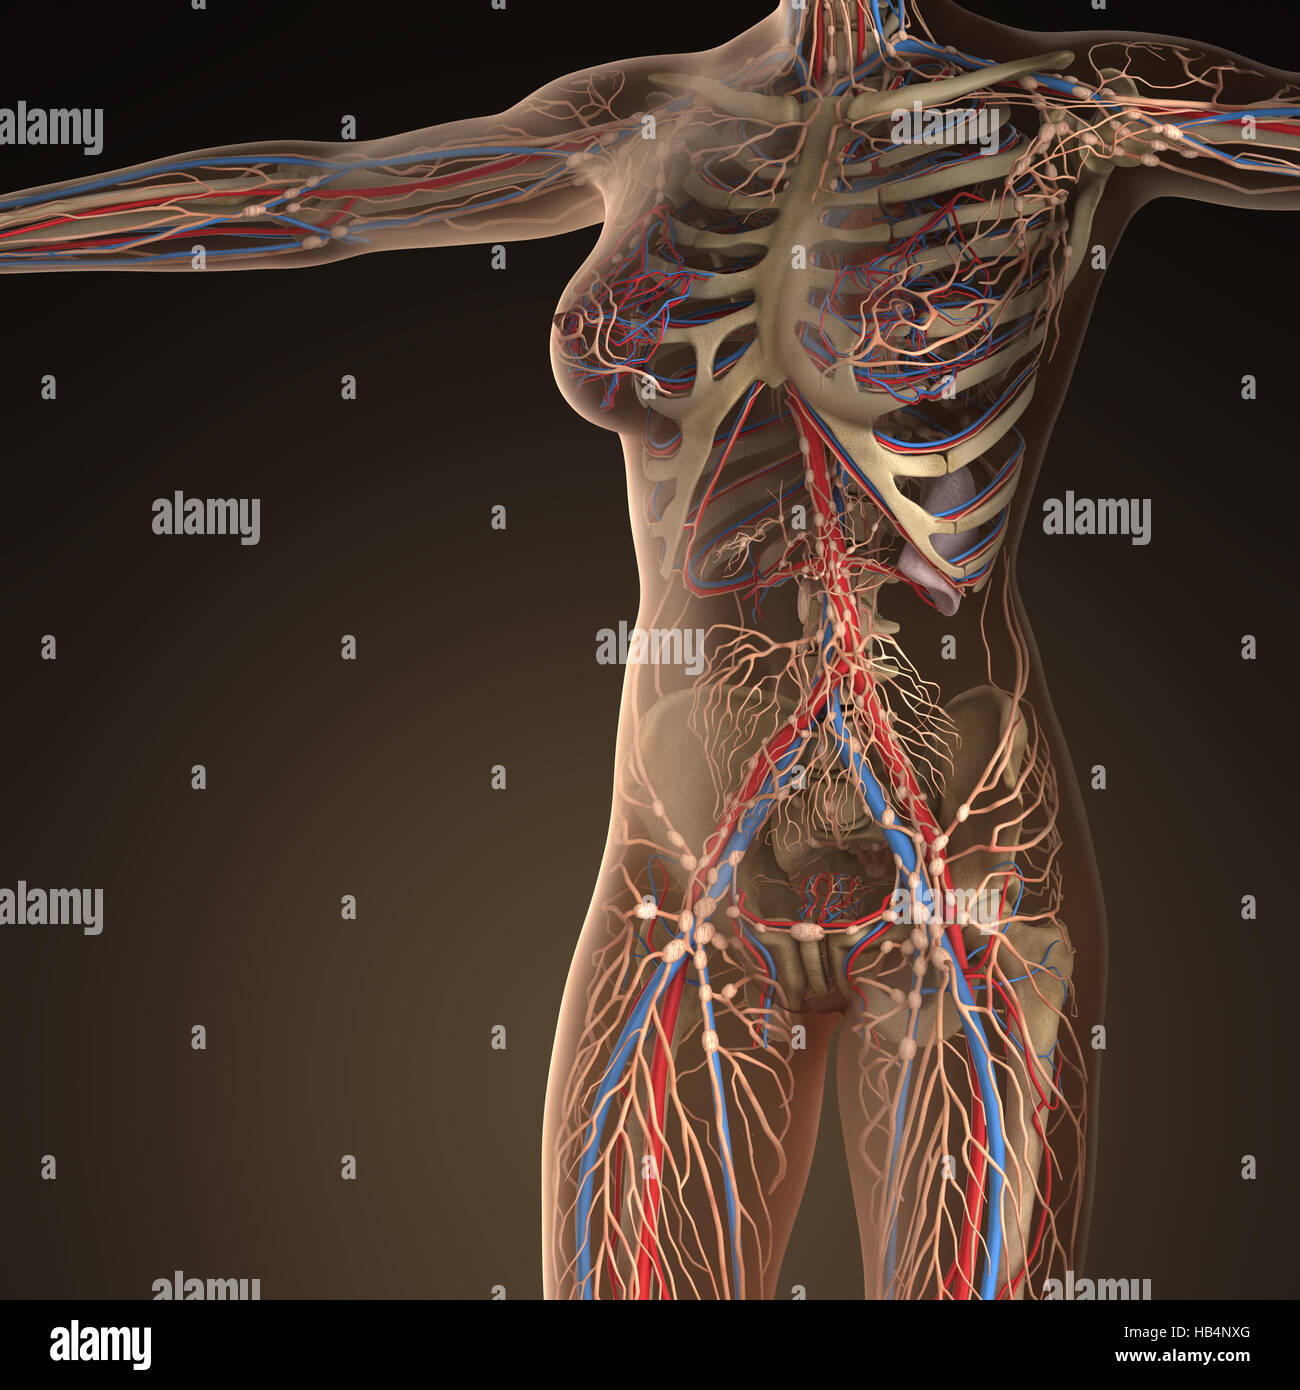 Human circulation cardiovascular system with bones in transparent body Stock Photo